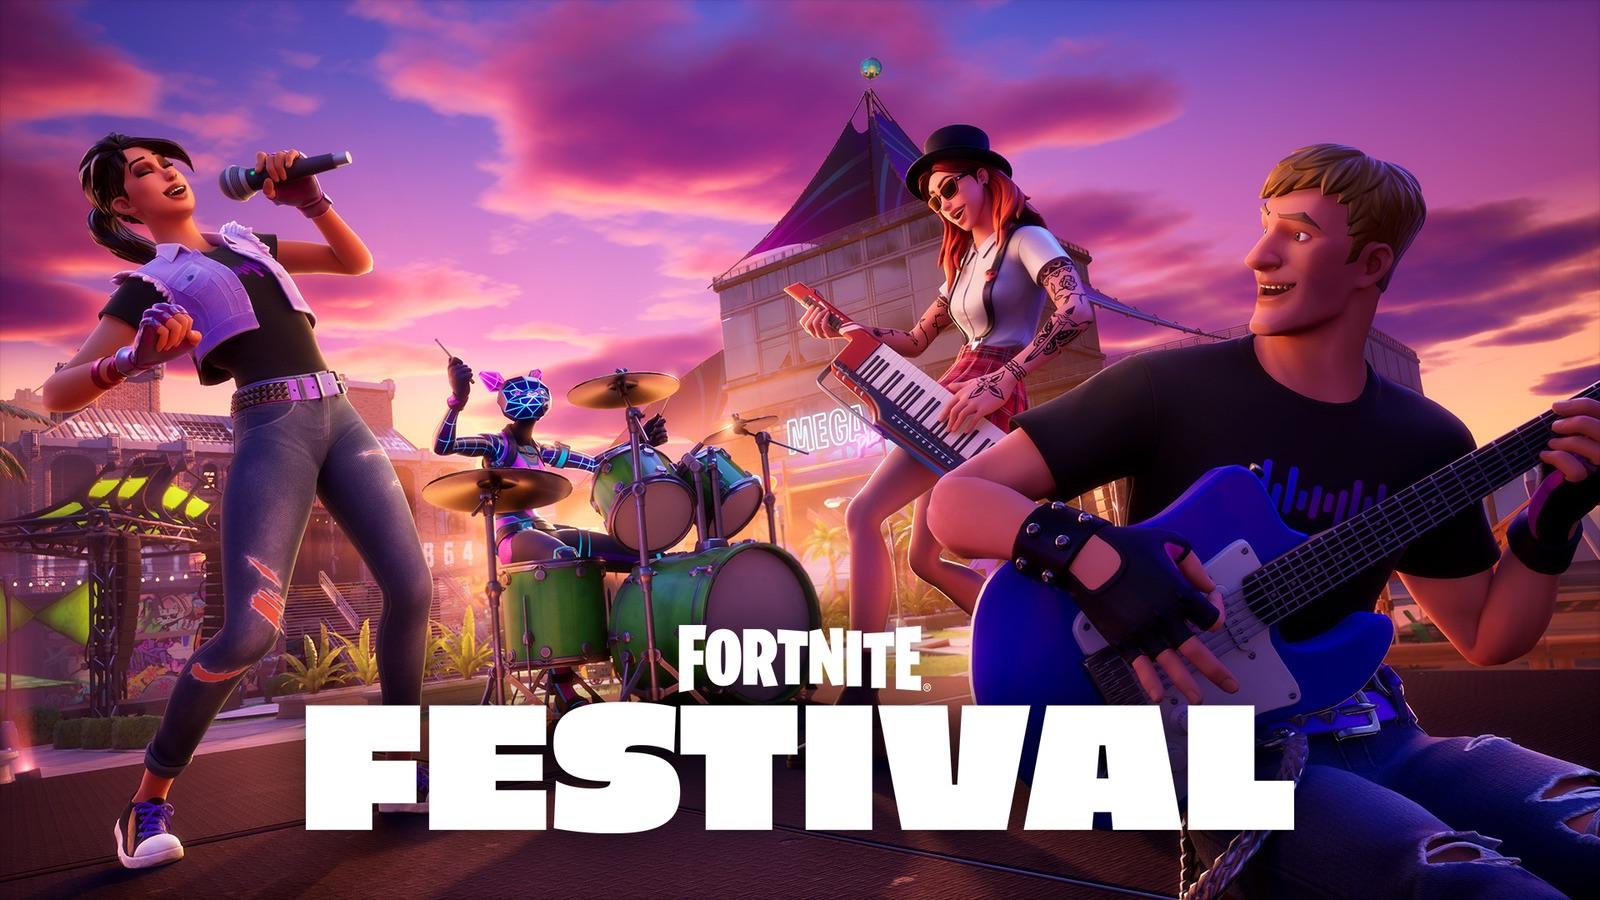 Is Fortnite Festival free to play? - Dexerto